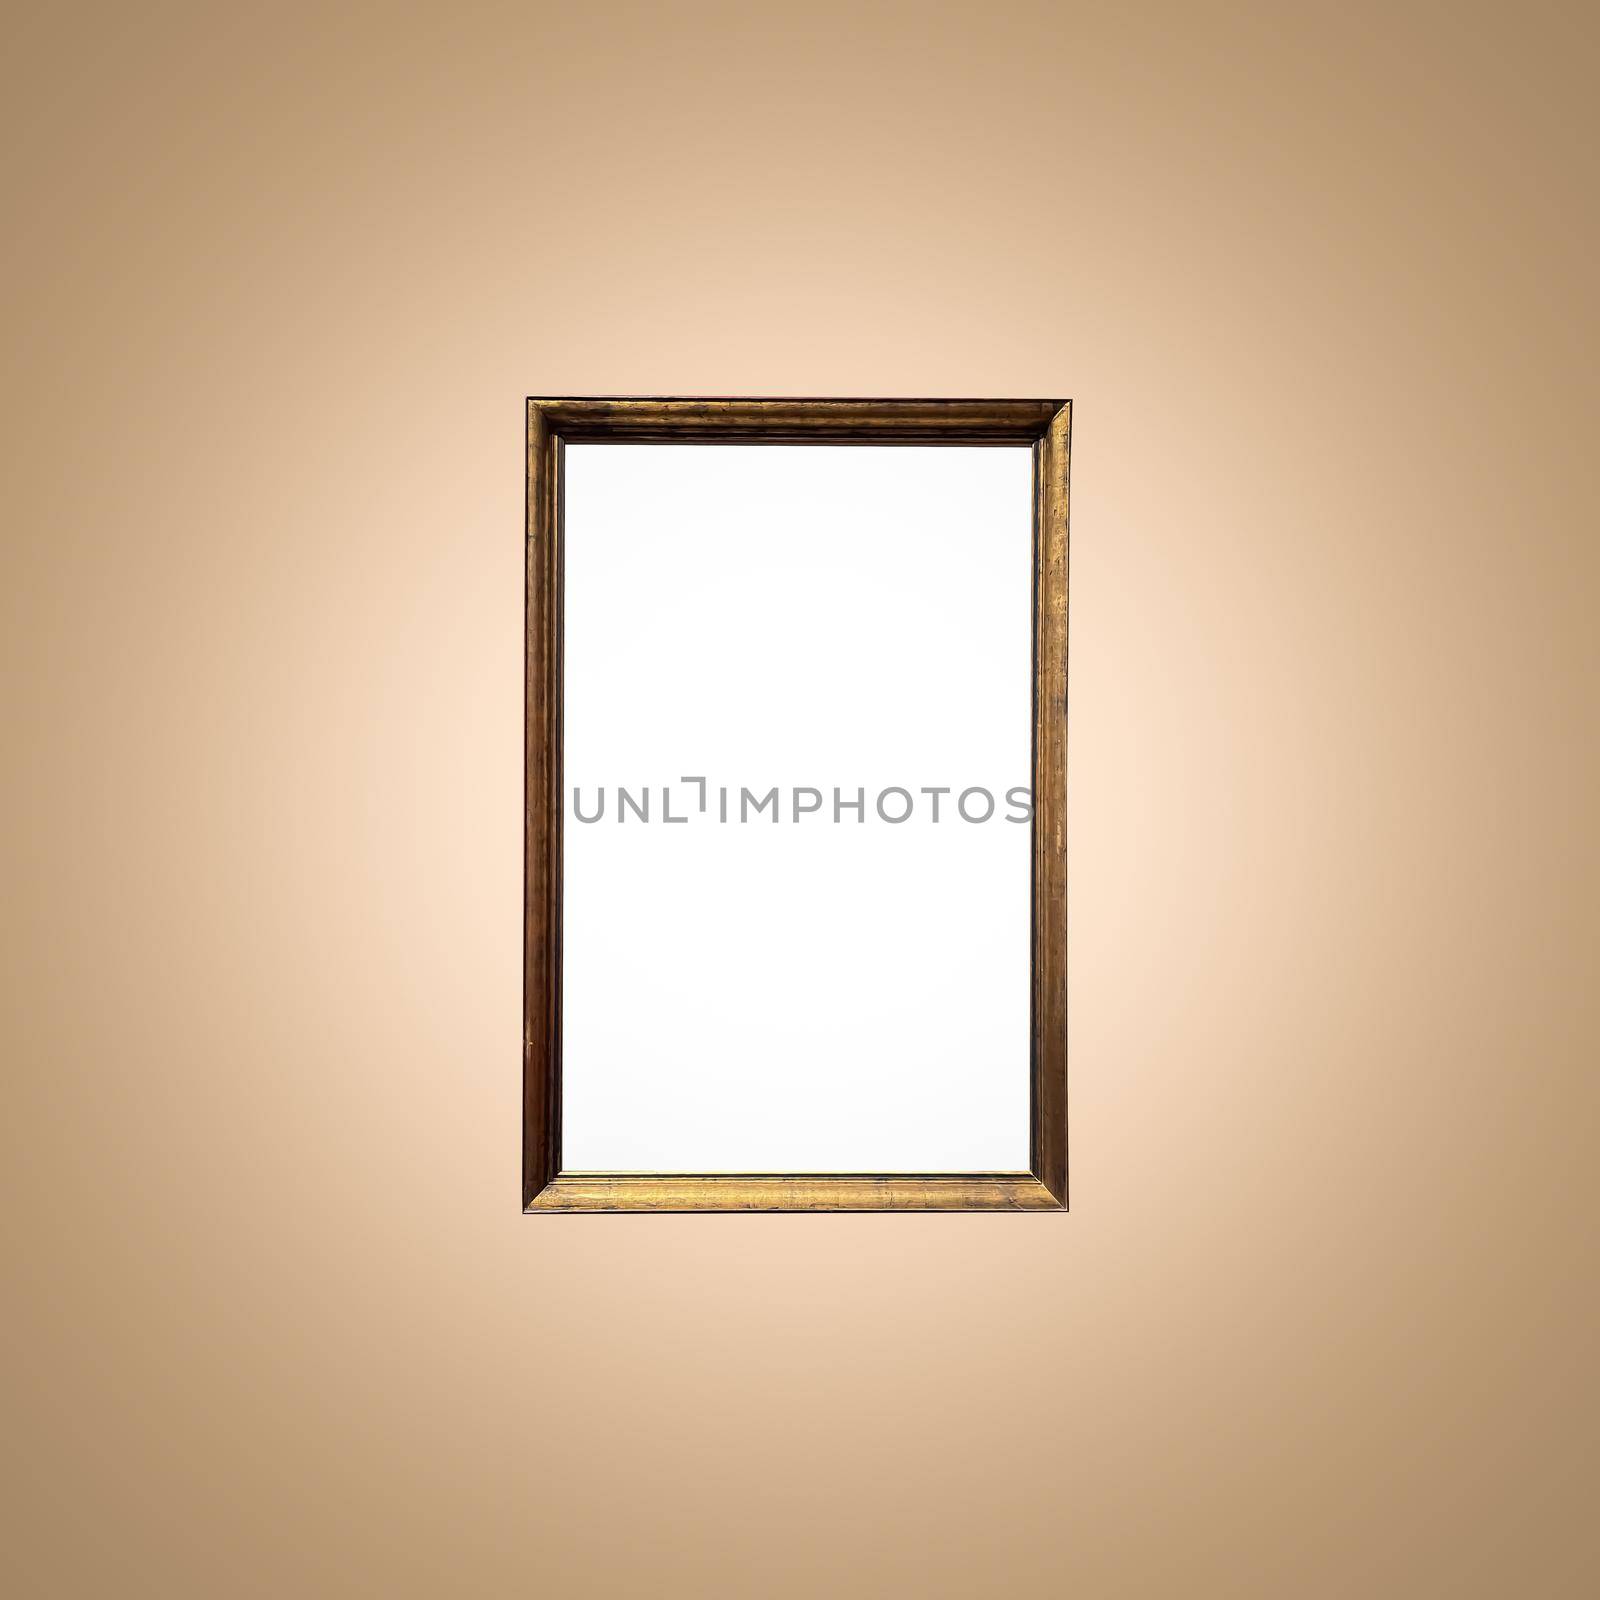 Antique art fair gallery frame on beige wall at auction house or museum exhibition, blank template with empty white copyspace for mockup design, artwork by Anneleven